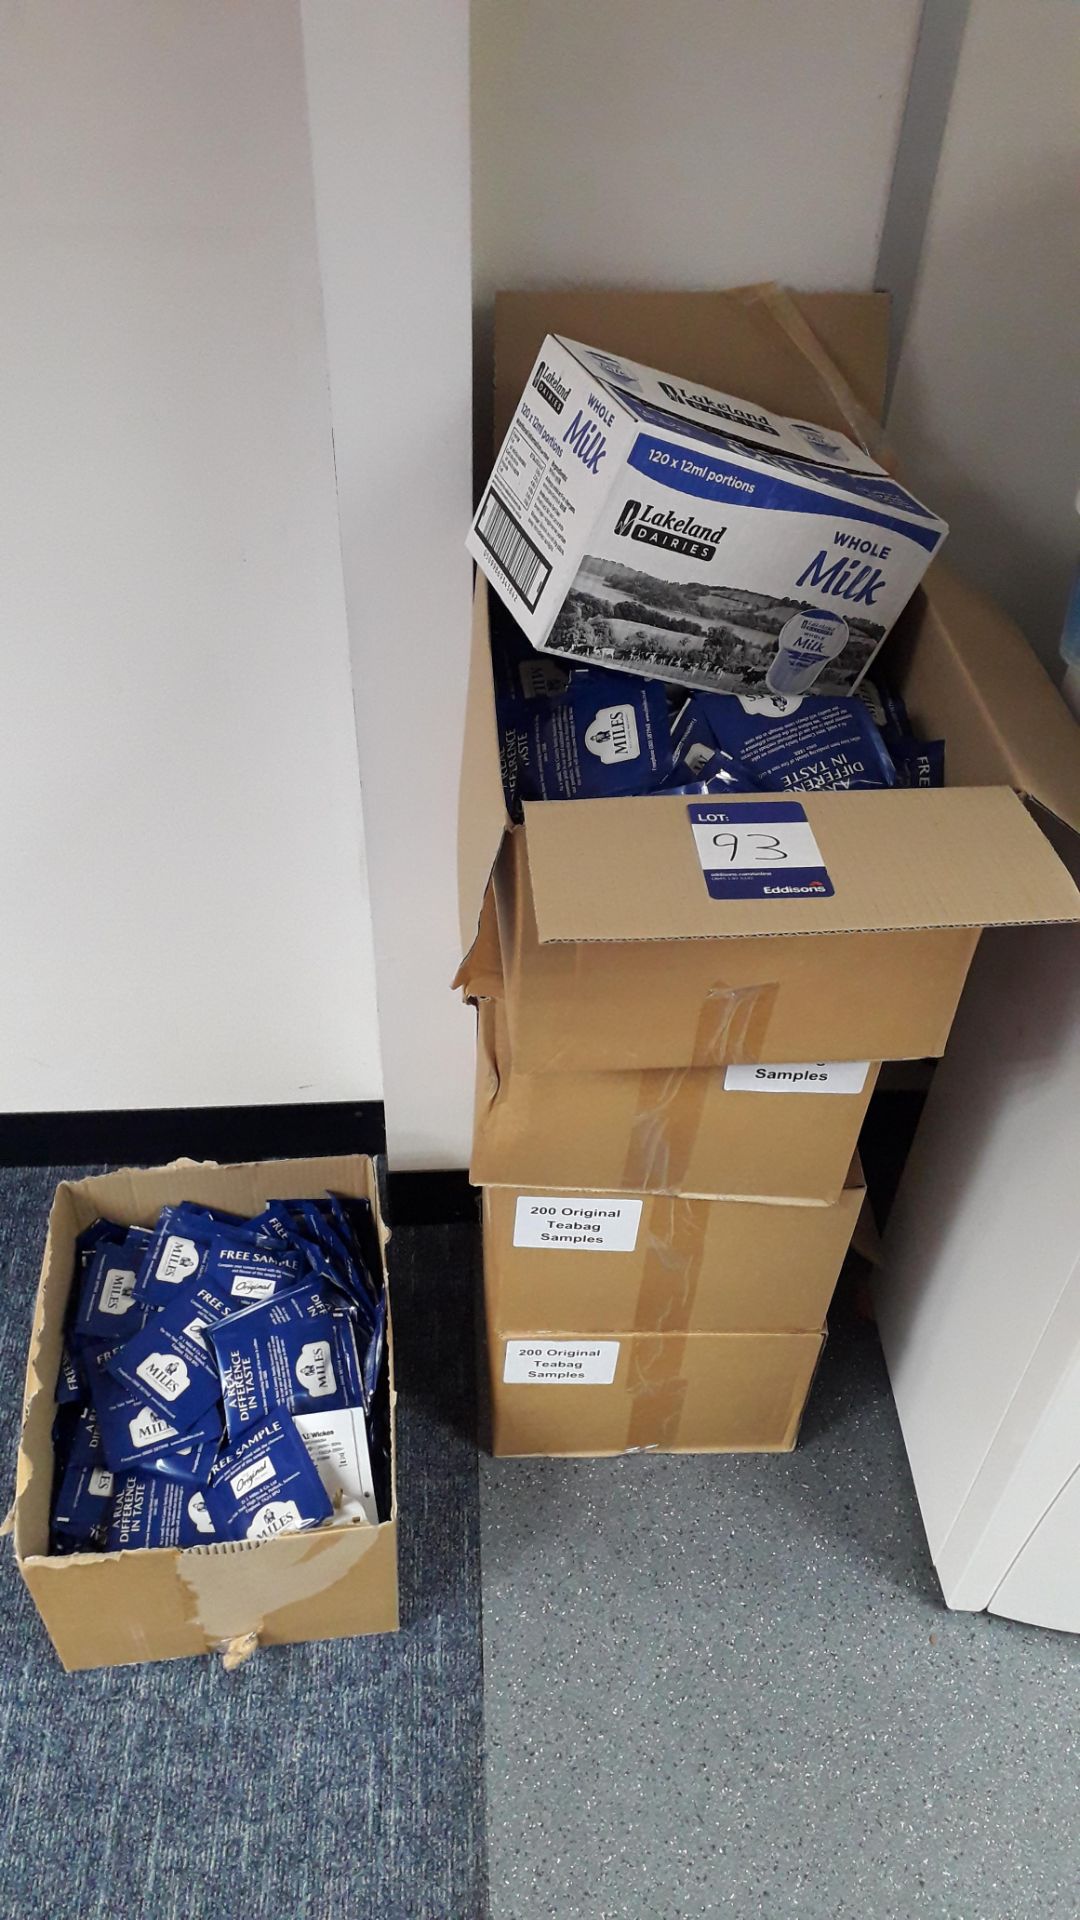 5 Boxes of Miles Sample Teabags and Quantity of Ta